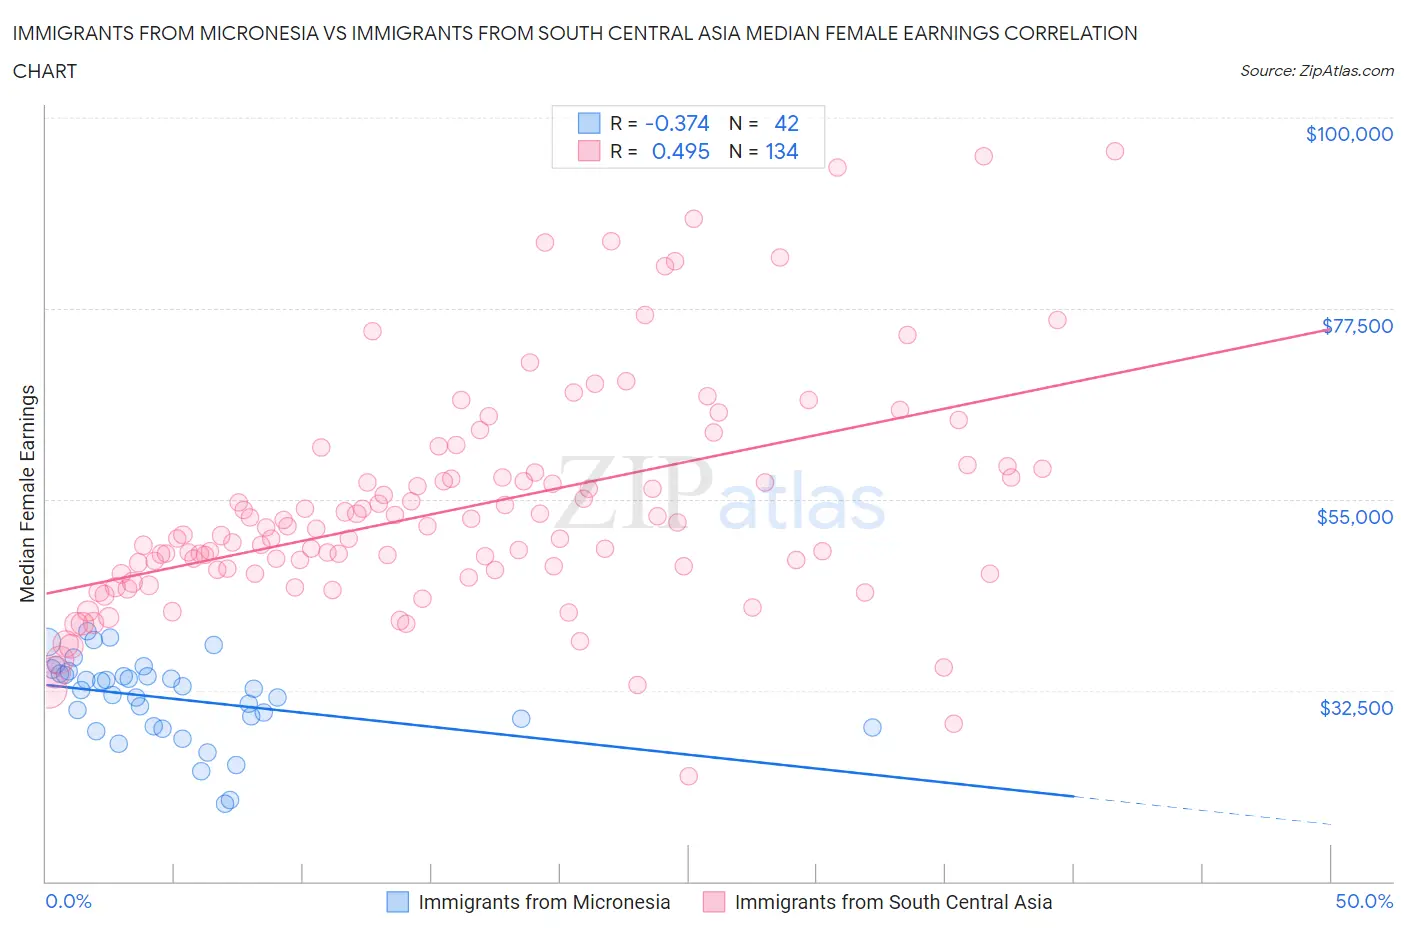 Immigrants from Micronesia vs Immigrants from South Central Asia Median Female Earnings